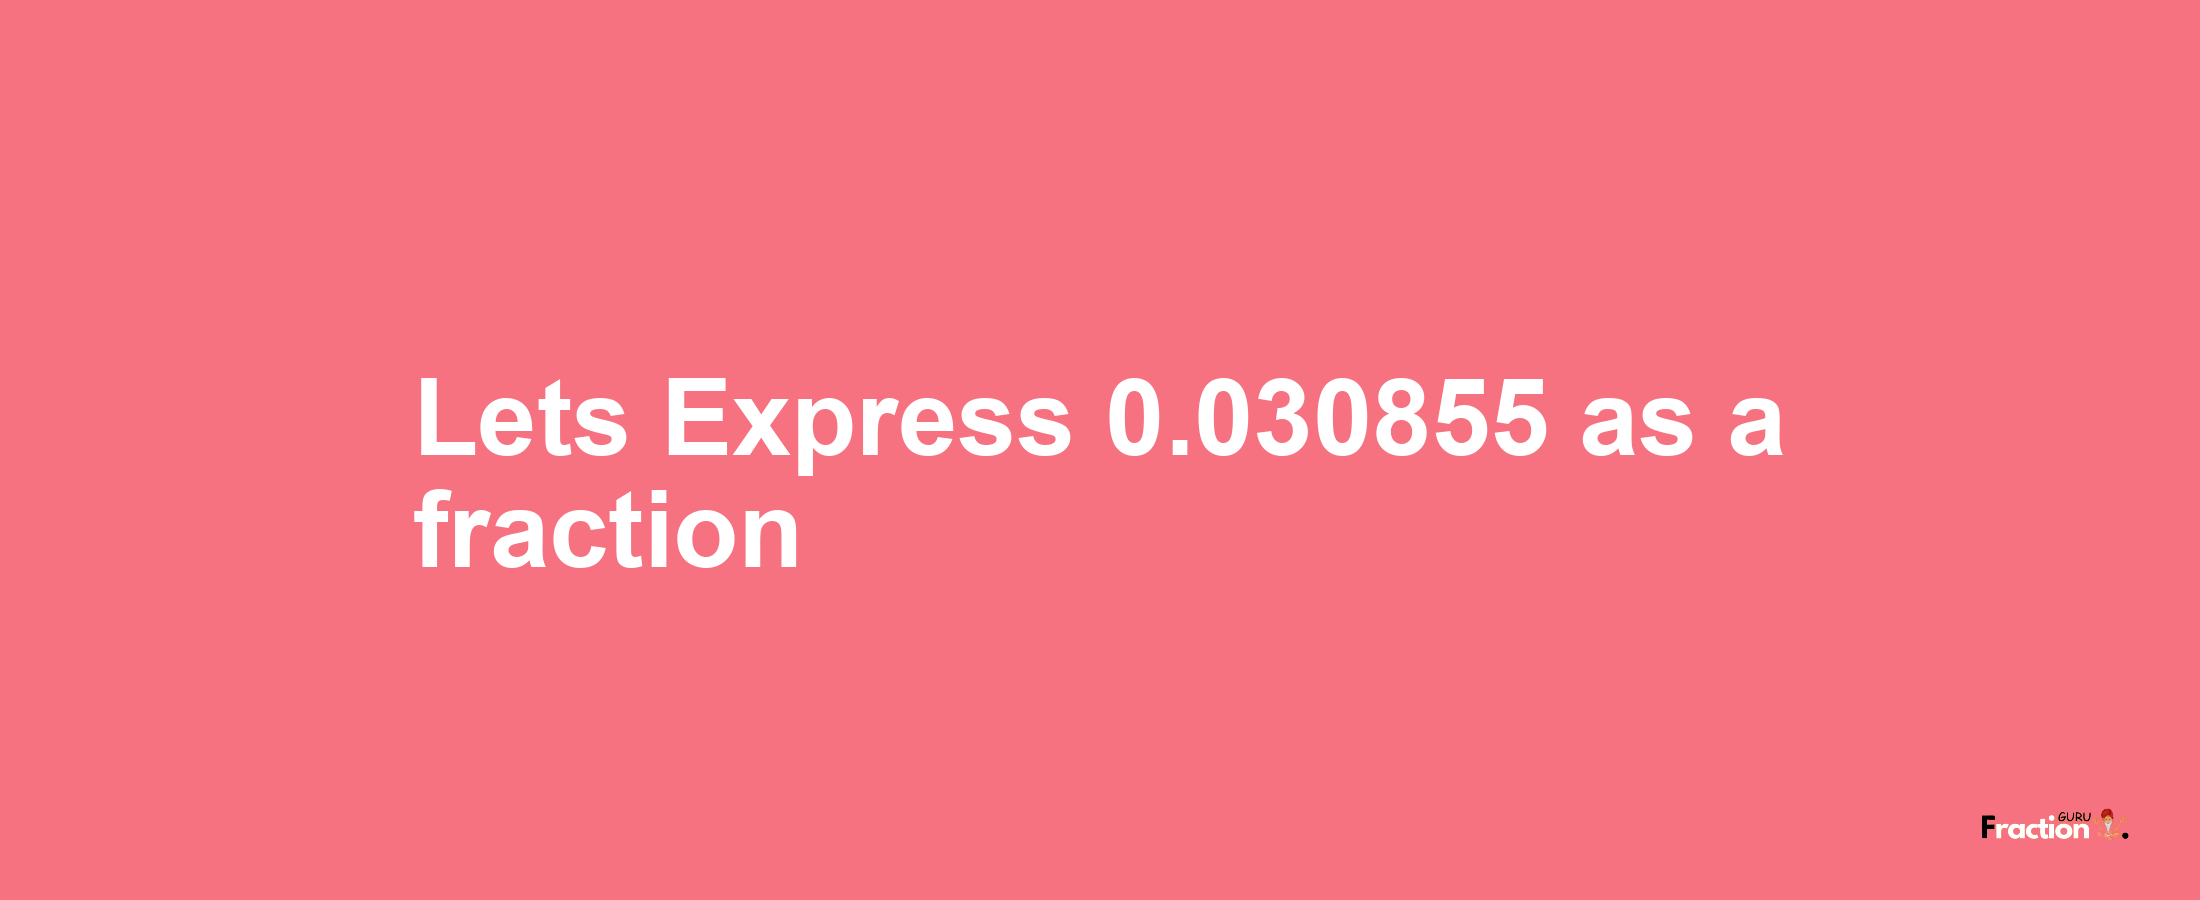 Lets Express 0.030855 as afraction